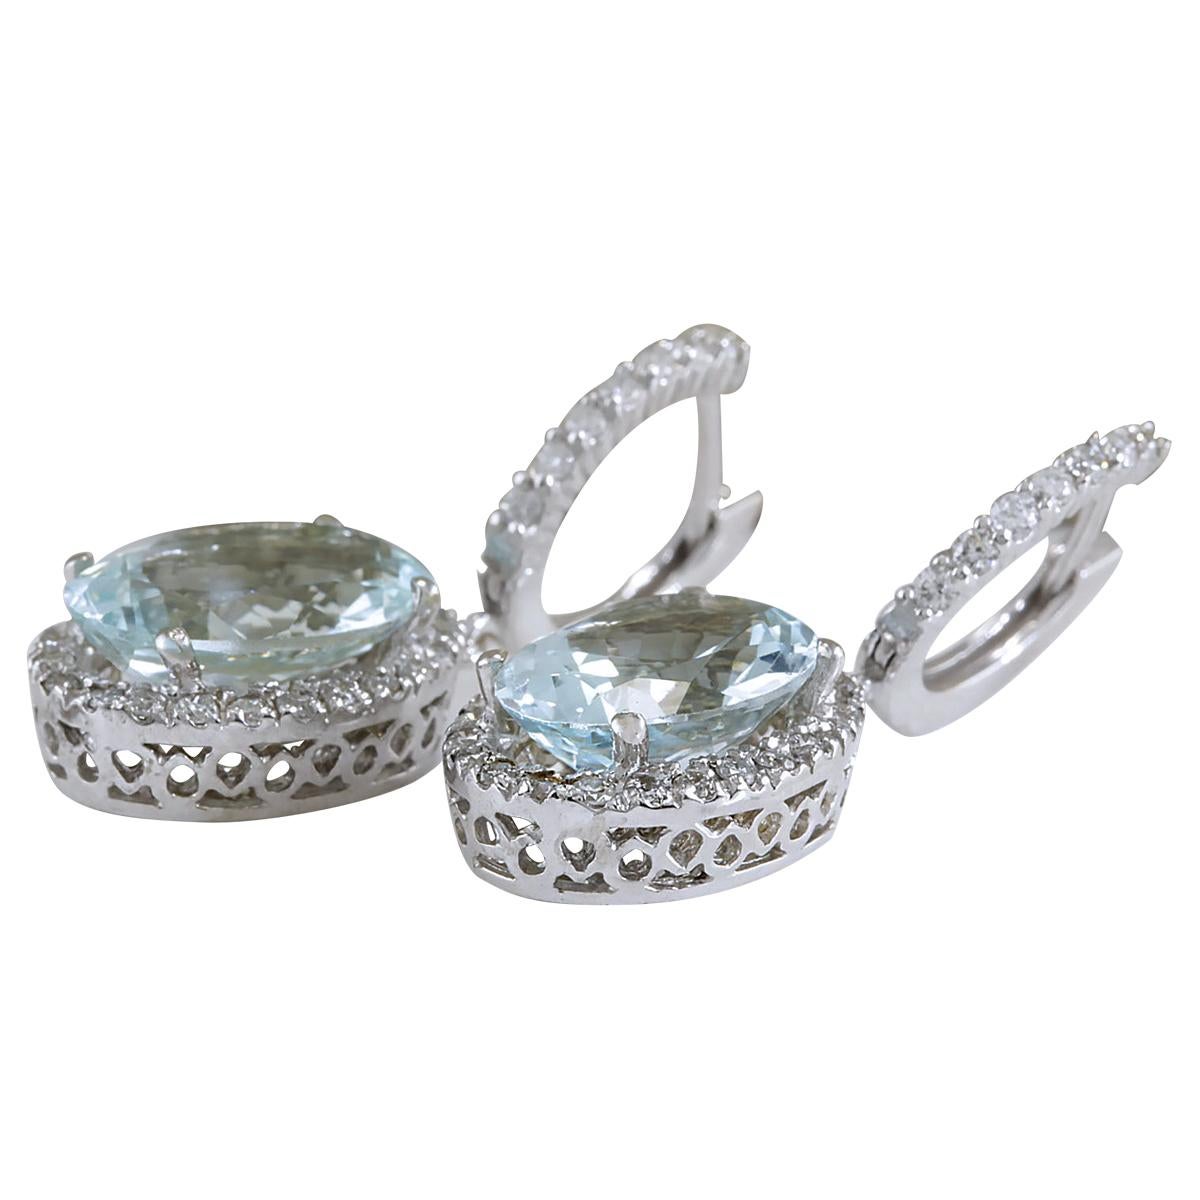 Stamped: 14K White Gold
Total Earrings Weight: 8.6 Grams
Earrings Length: 1.26 Inches
Total Natural Aquamarine Weight is 8.46 Carat (Measures: 14.00x10.00 mm)
Color: Blue
Diamond Weight: Total Natural Diamond Weight is 1.50 Carat
Color: F-G,